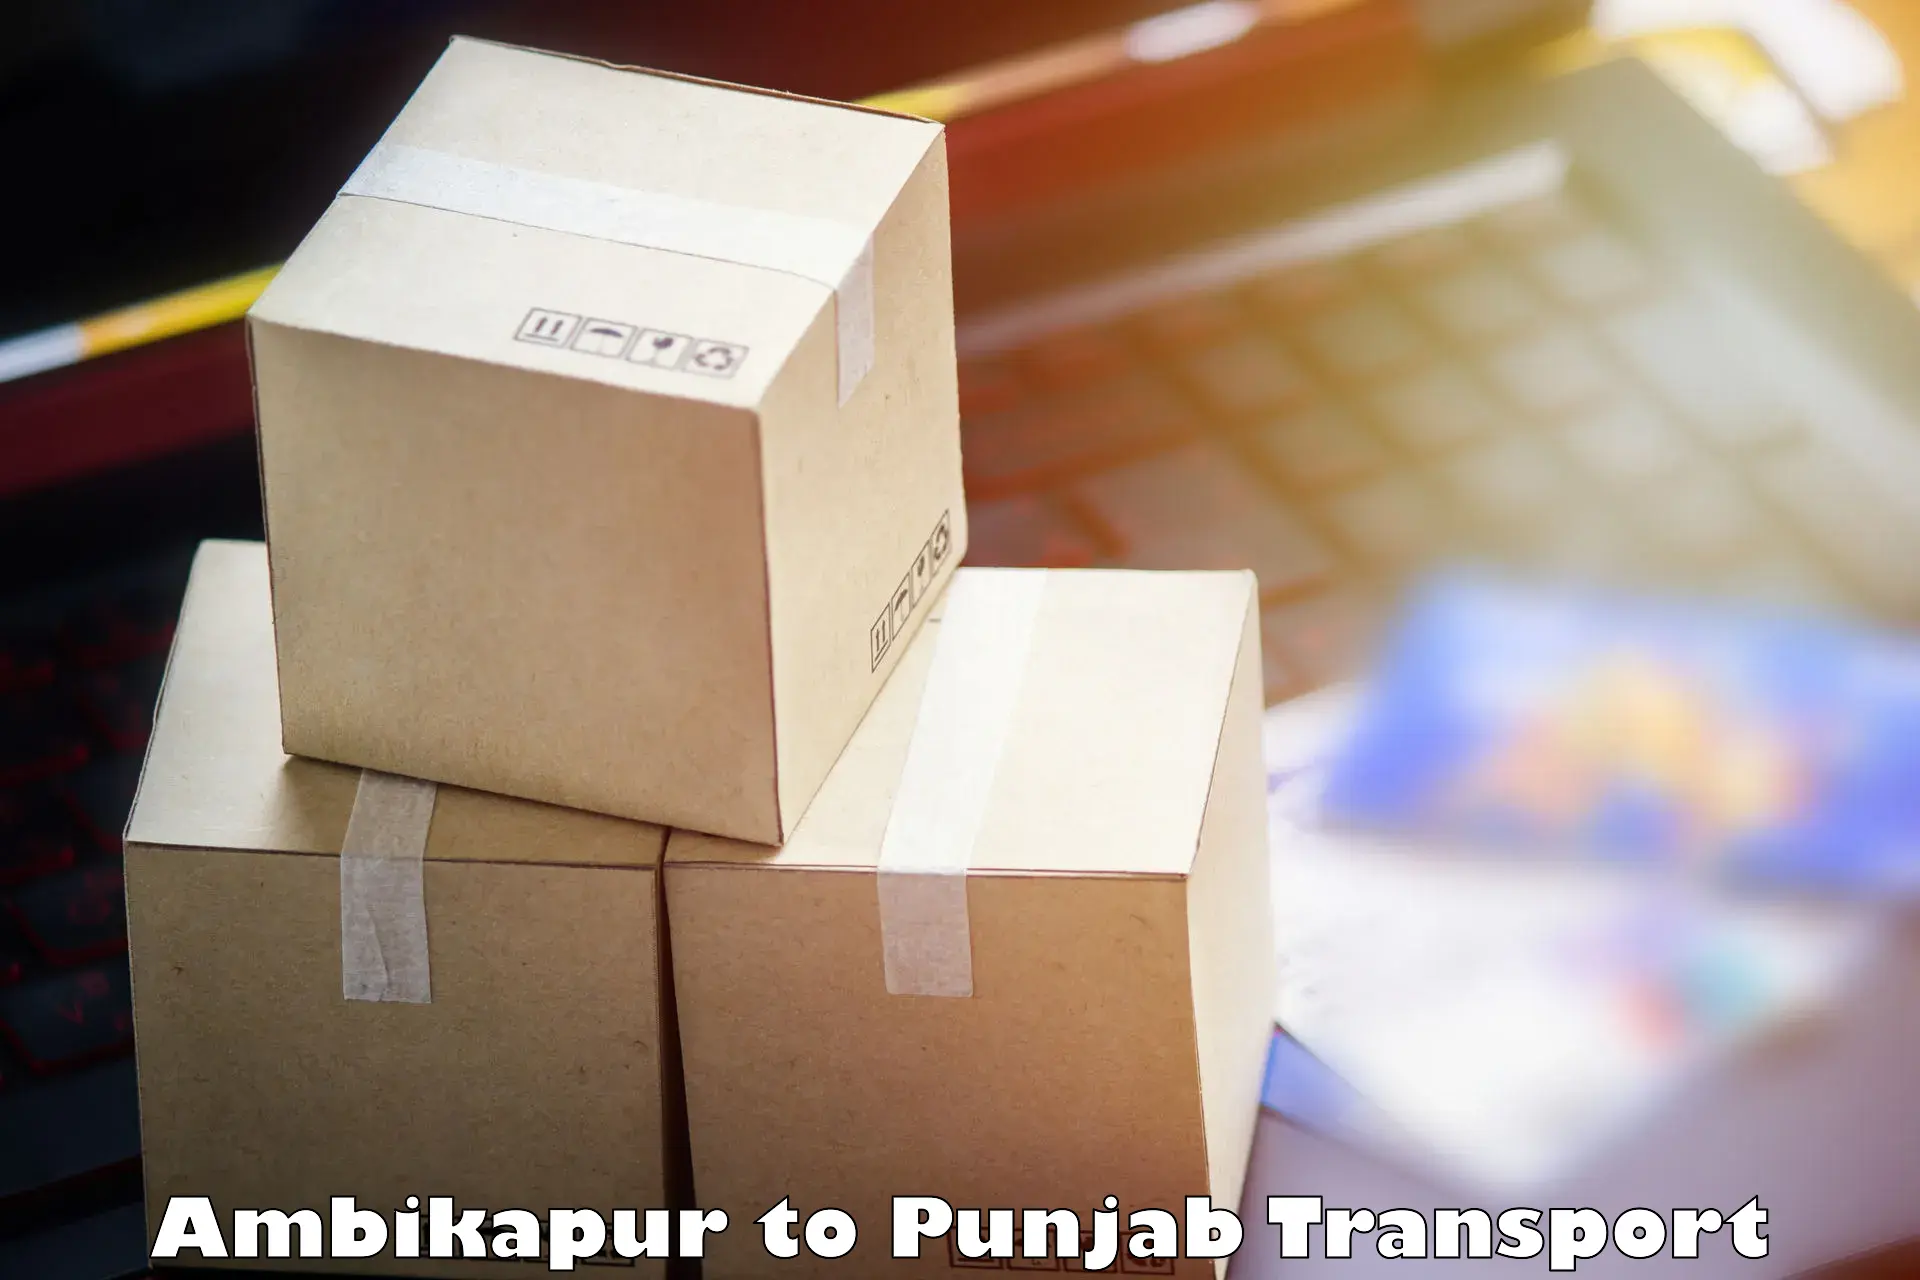 Truck transport companies in India Ambikapur to Malout